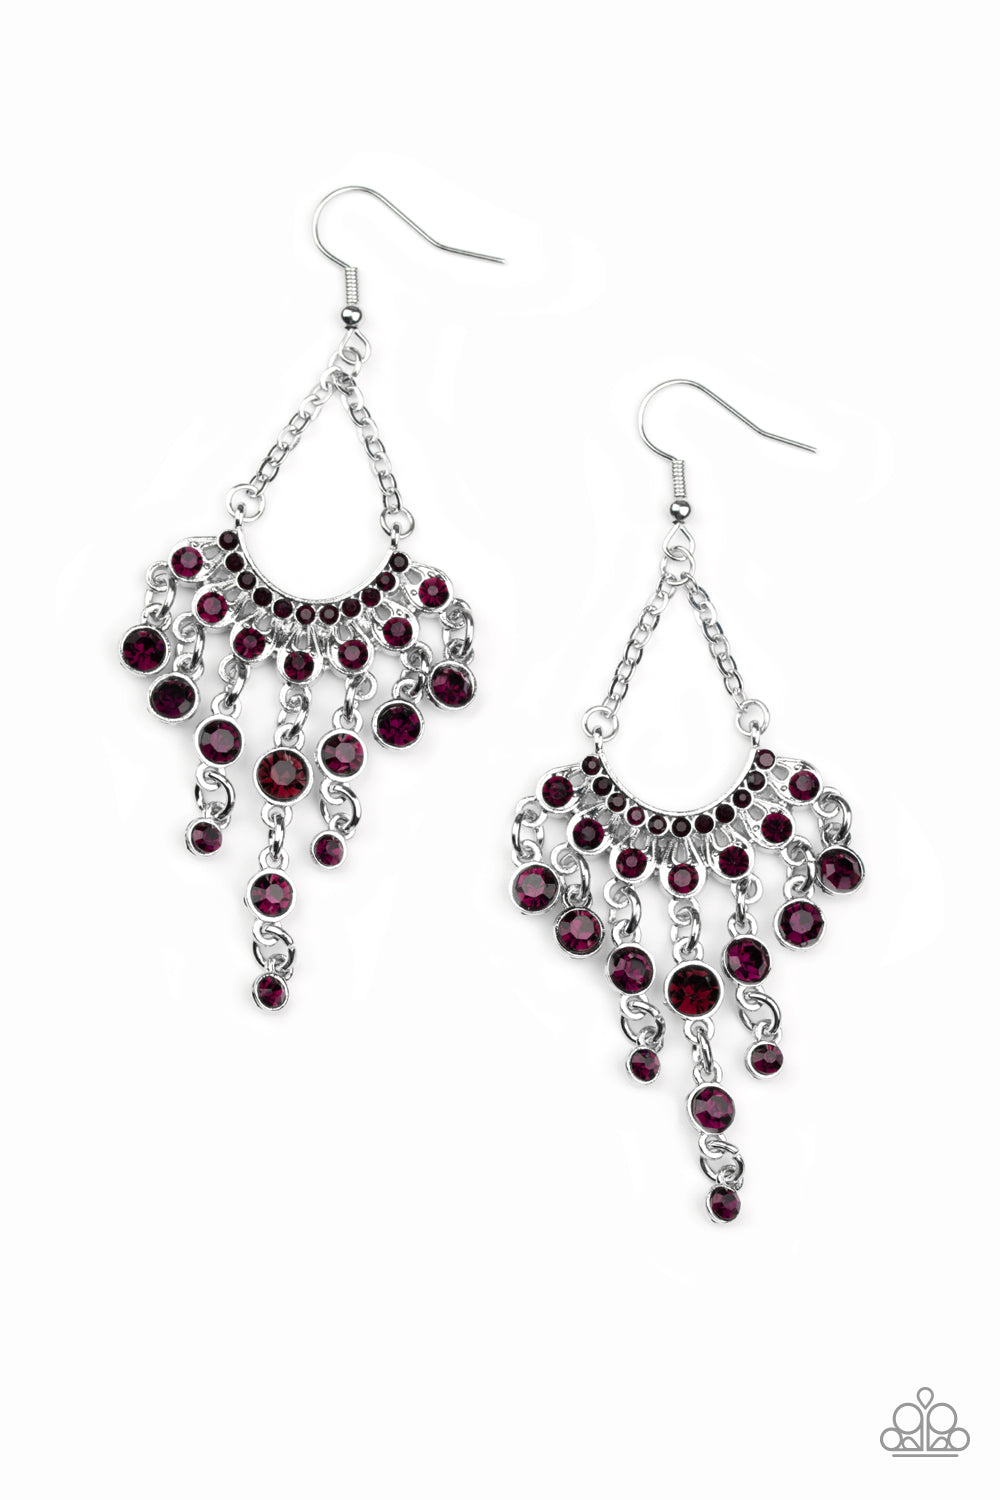 Commanding Candescence Earrings by Paparazzi Accessories